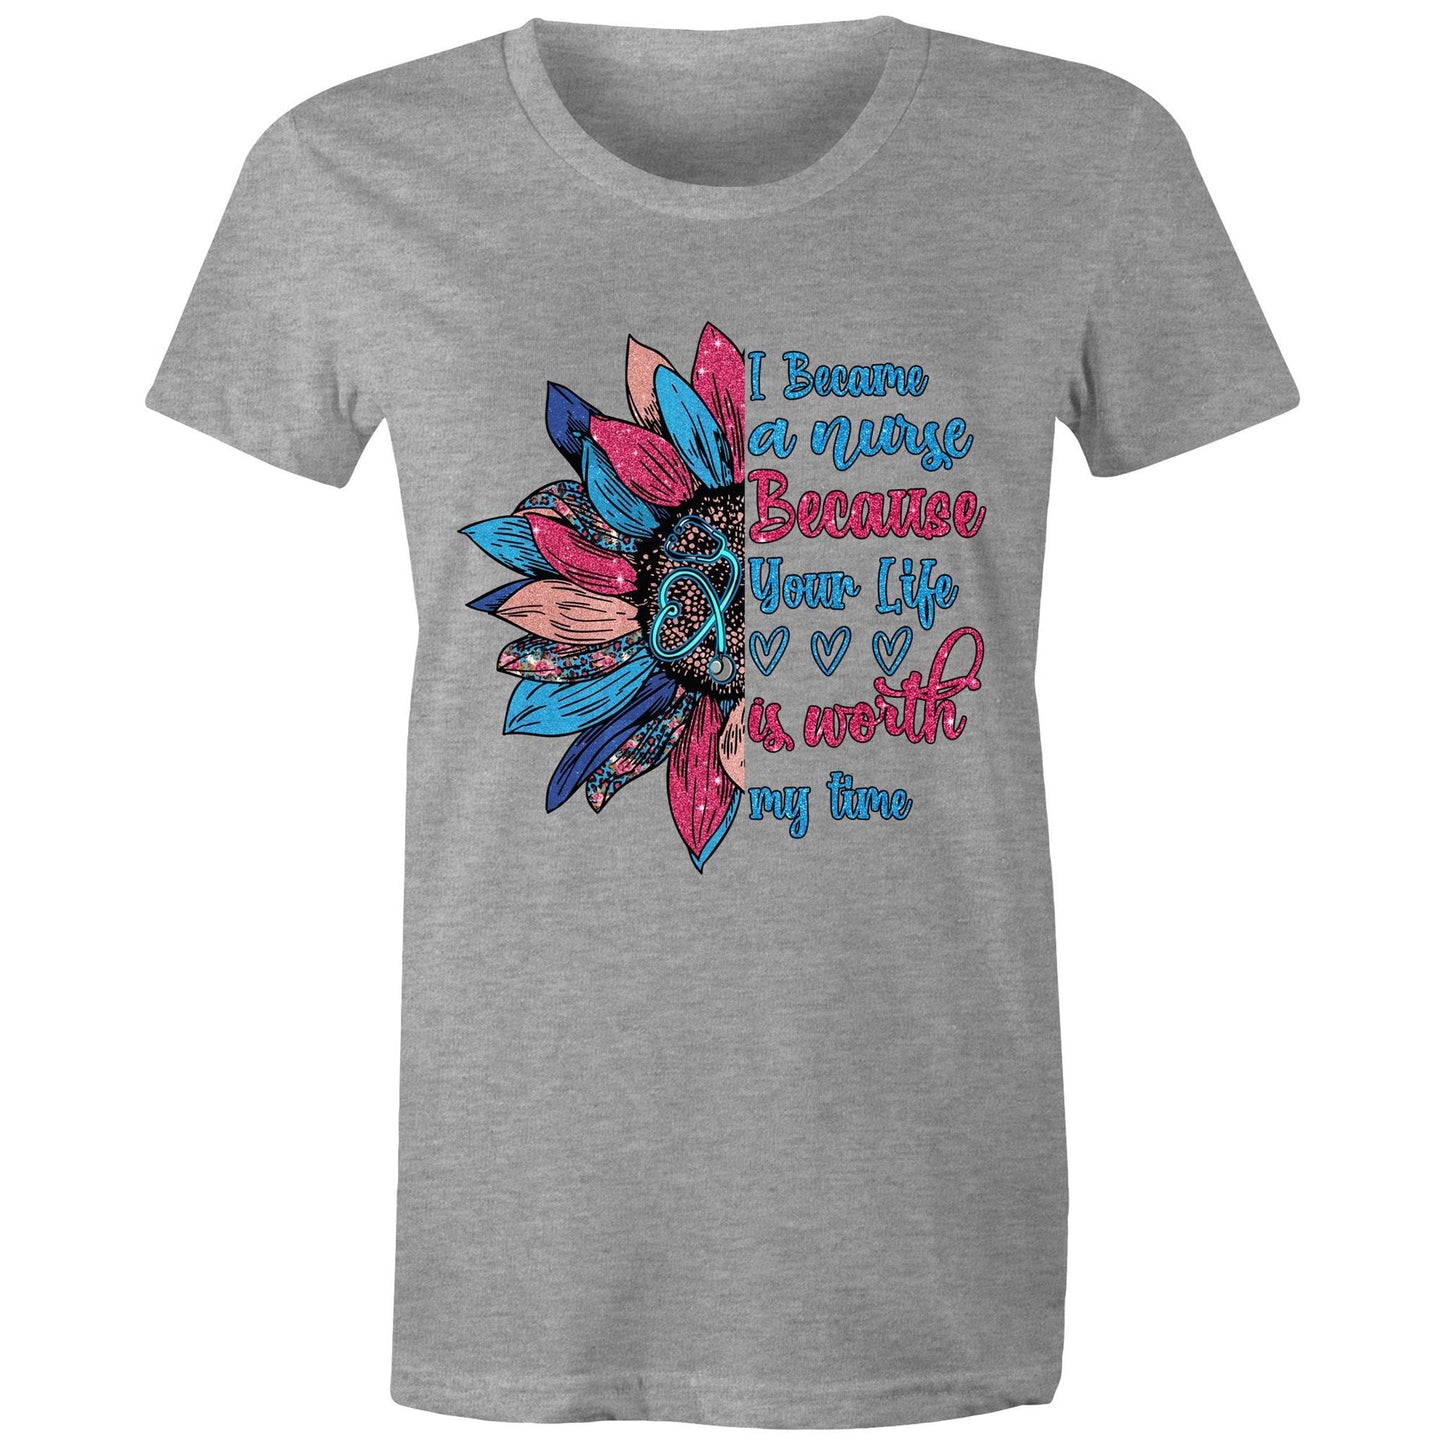 Your Life is Worth my Time Nurse Women's Maple Tee